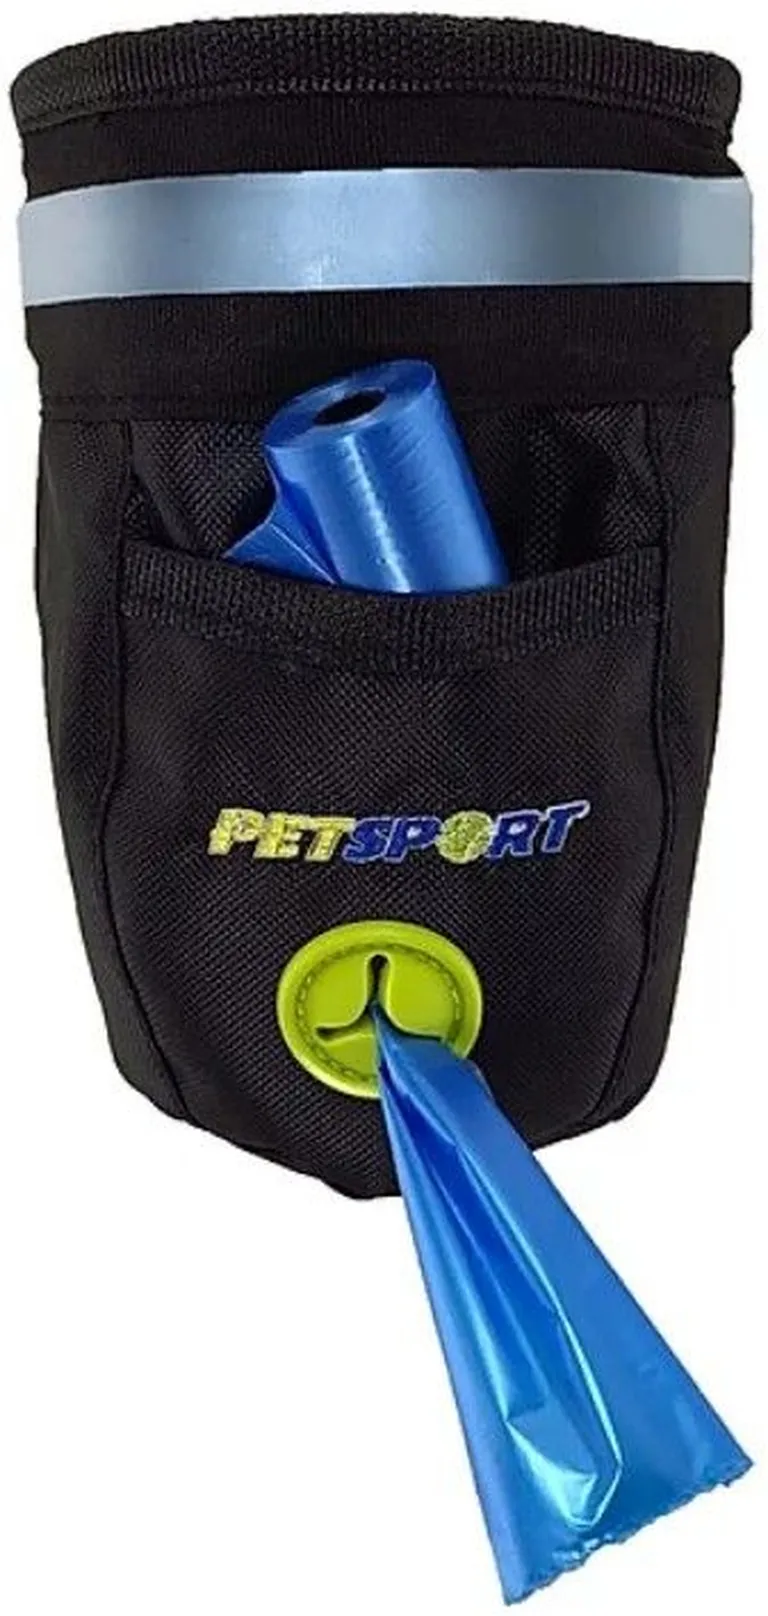 Petsport Biscuit Buddy Treat Pouch with Bag Dispenser Photo 1